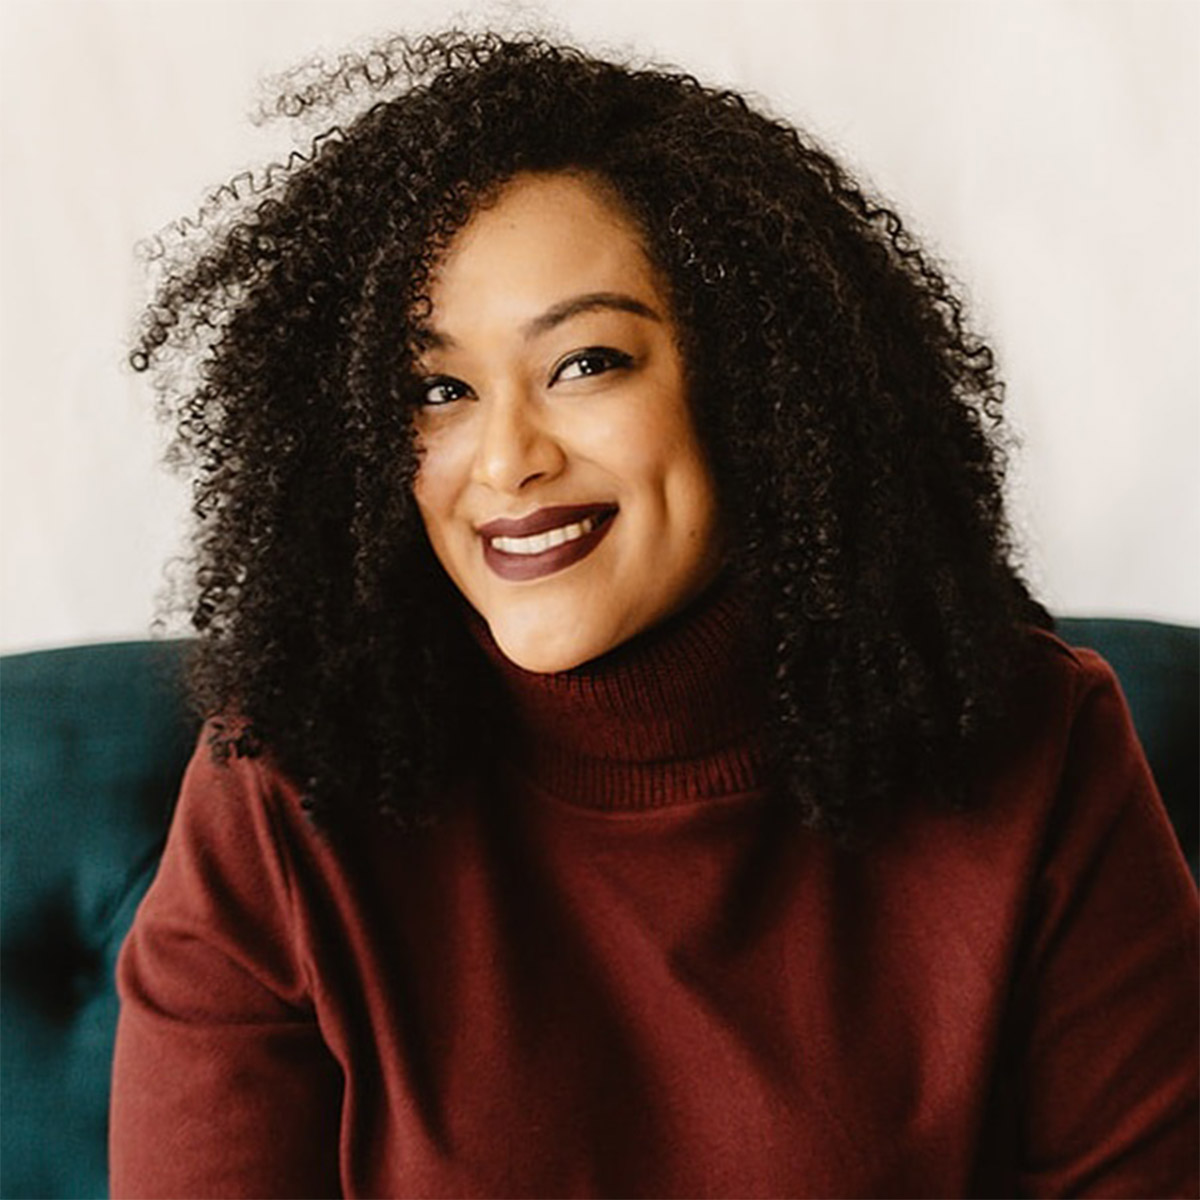 Dr. Ericka Burns color portrait. Dr. Burns is a Black woman with curly medium-length hair and is smiling, seated on an emerald-colored couch and wearing a reddish brown turtleneck.